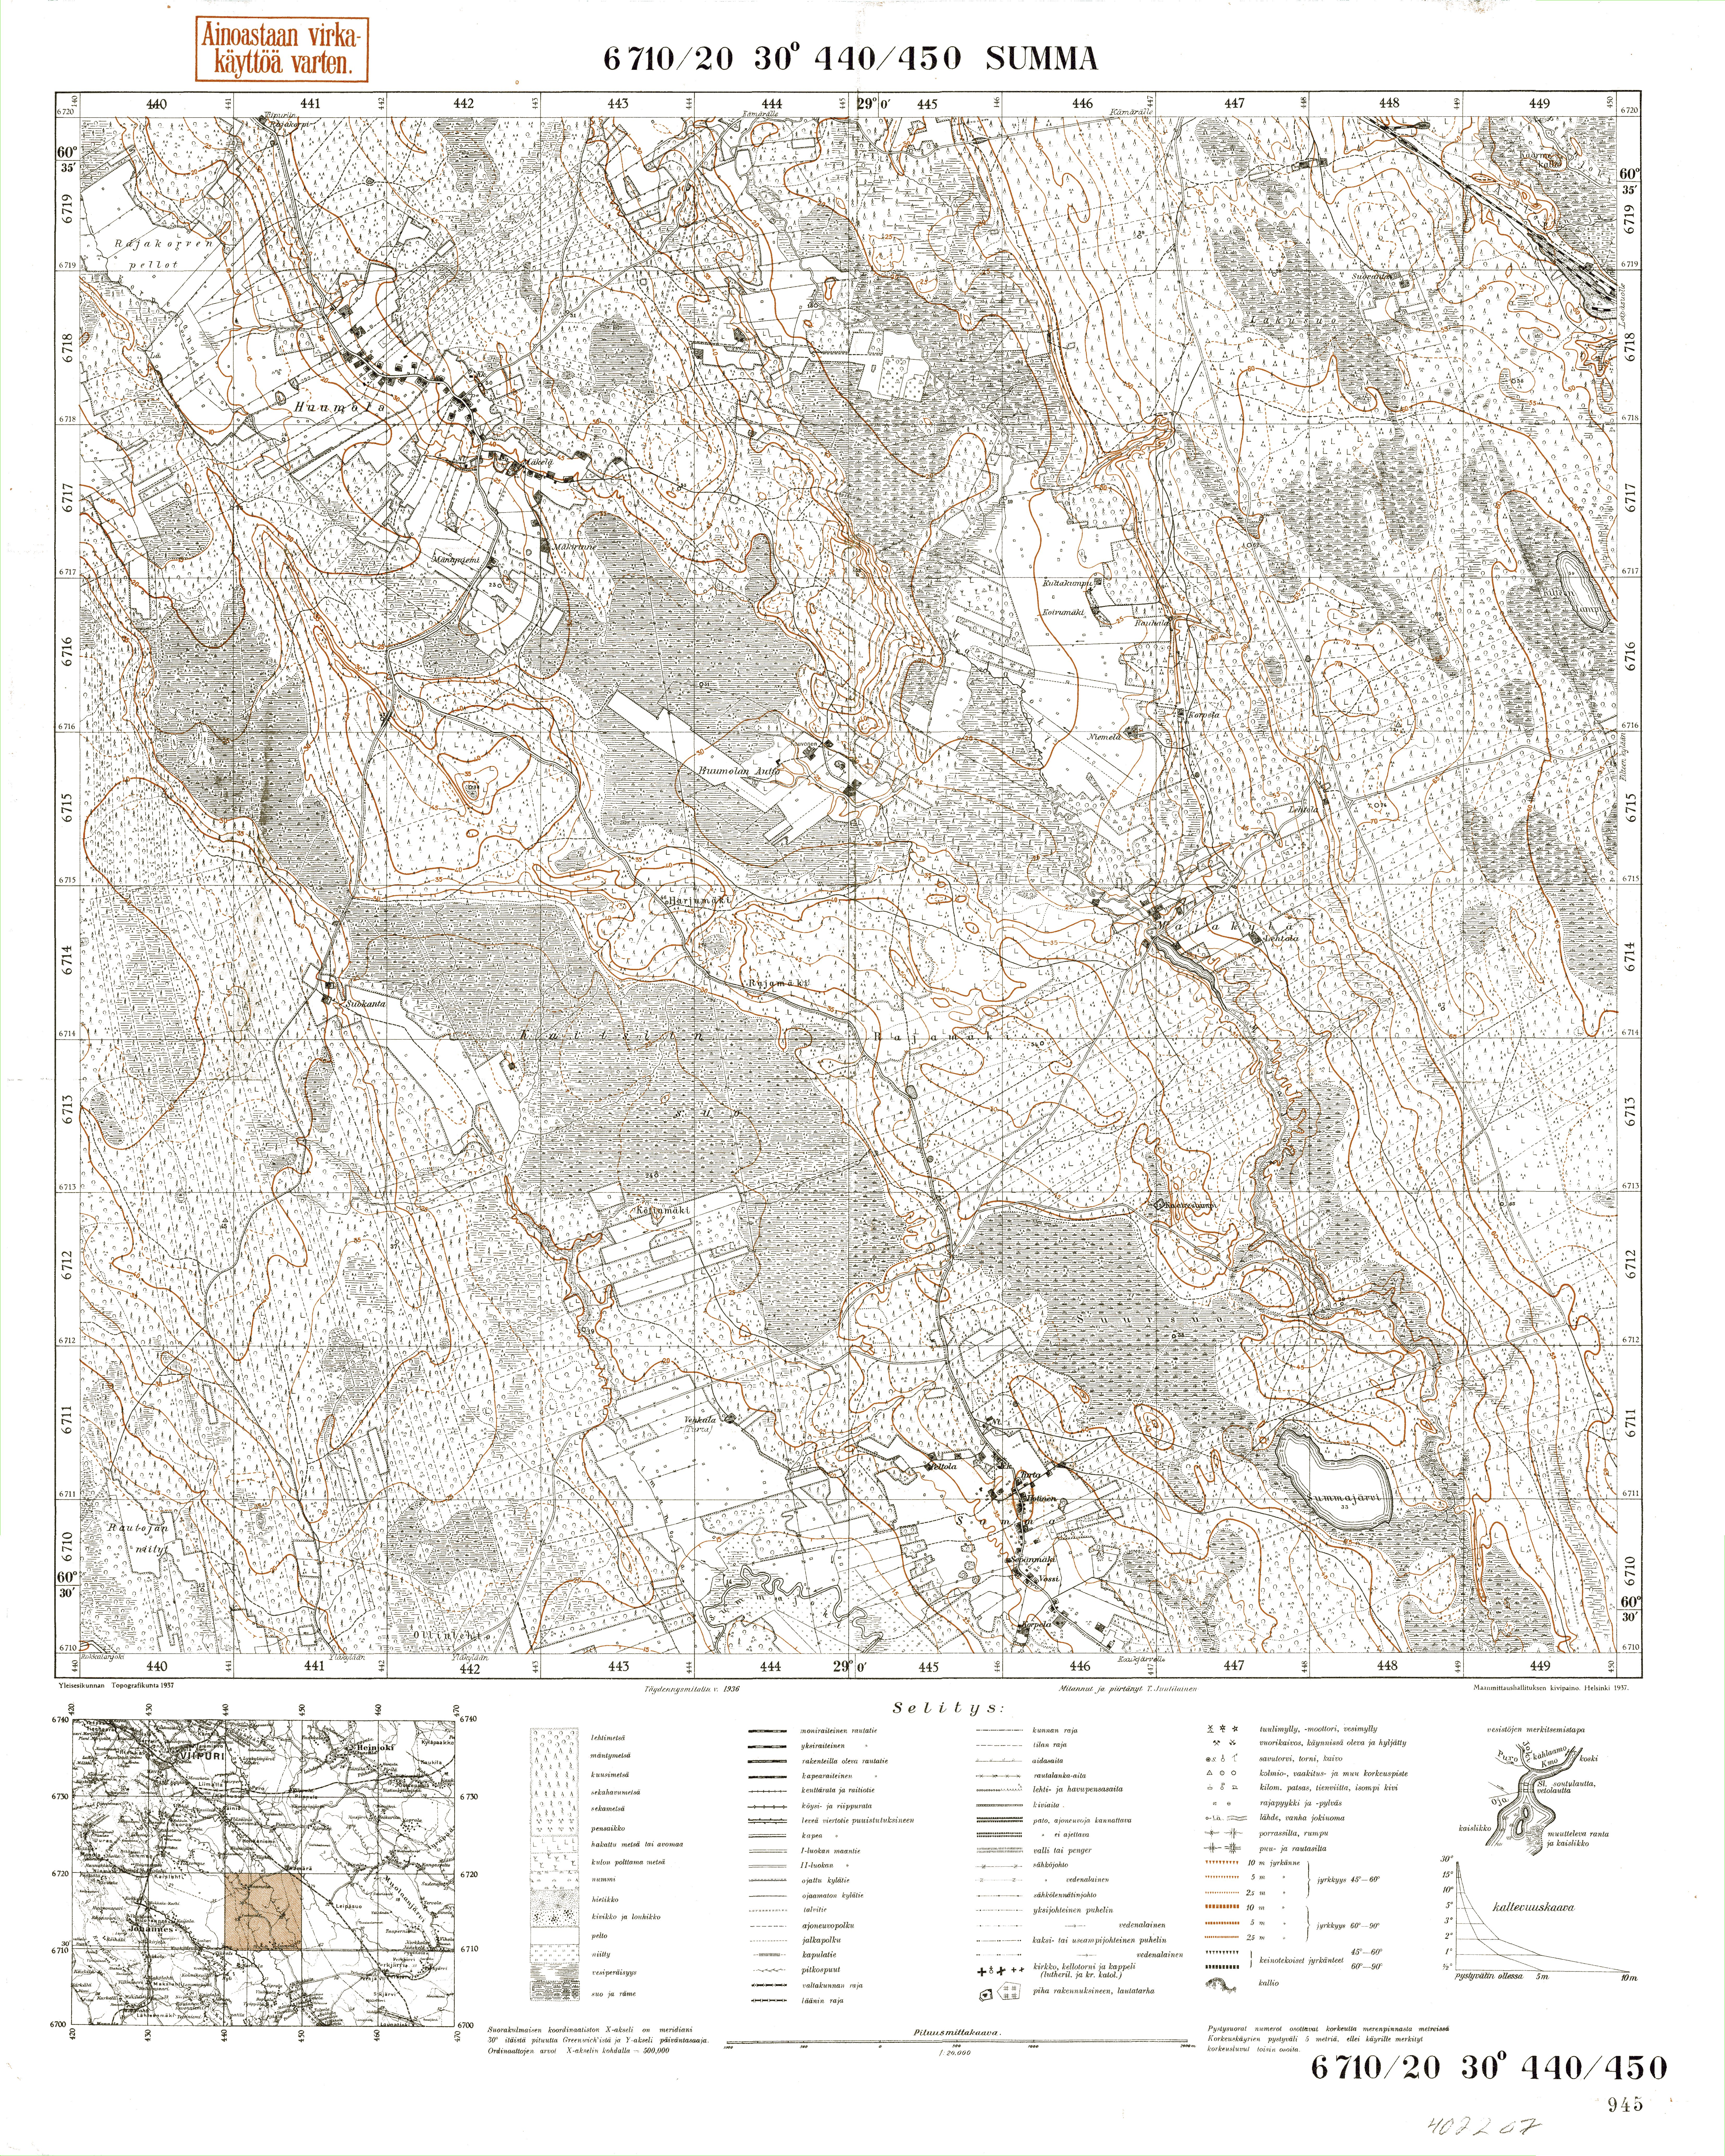 Summa Village Site. Summa. Topografikartta 402207. Topographic map from 1937. Use the zooming tool to explore in higher level of detail. Obtain as a quality print or high resolution image